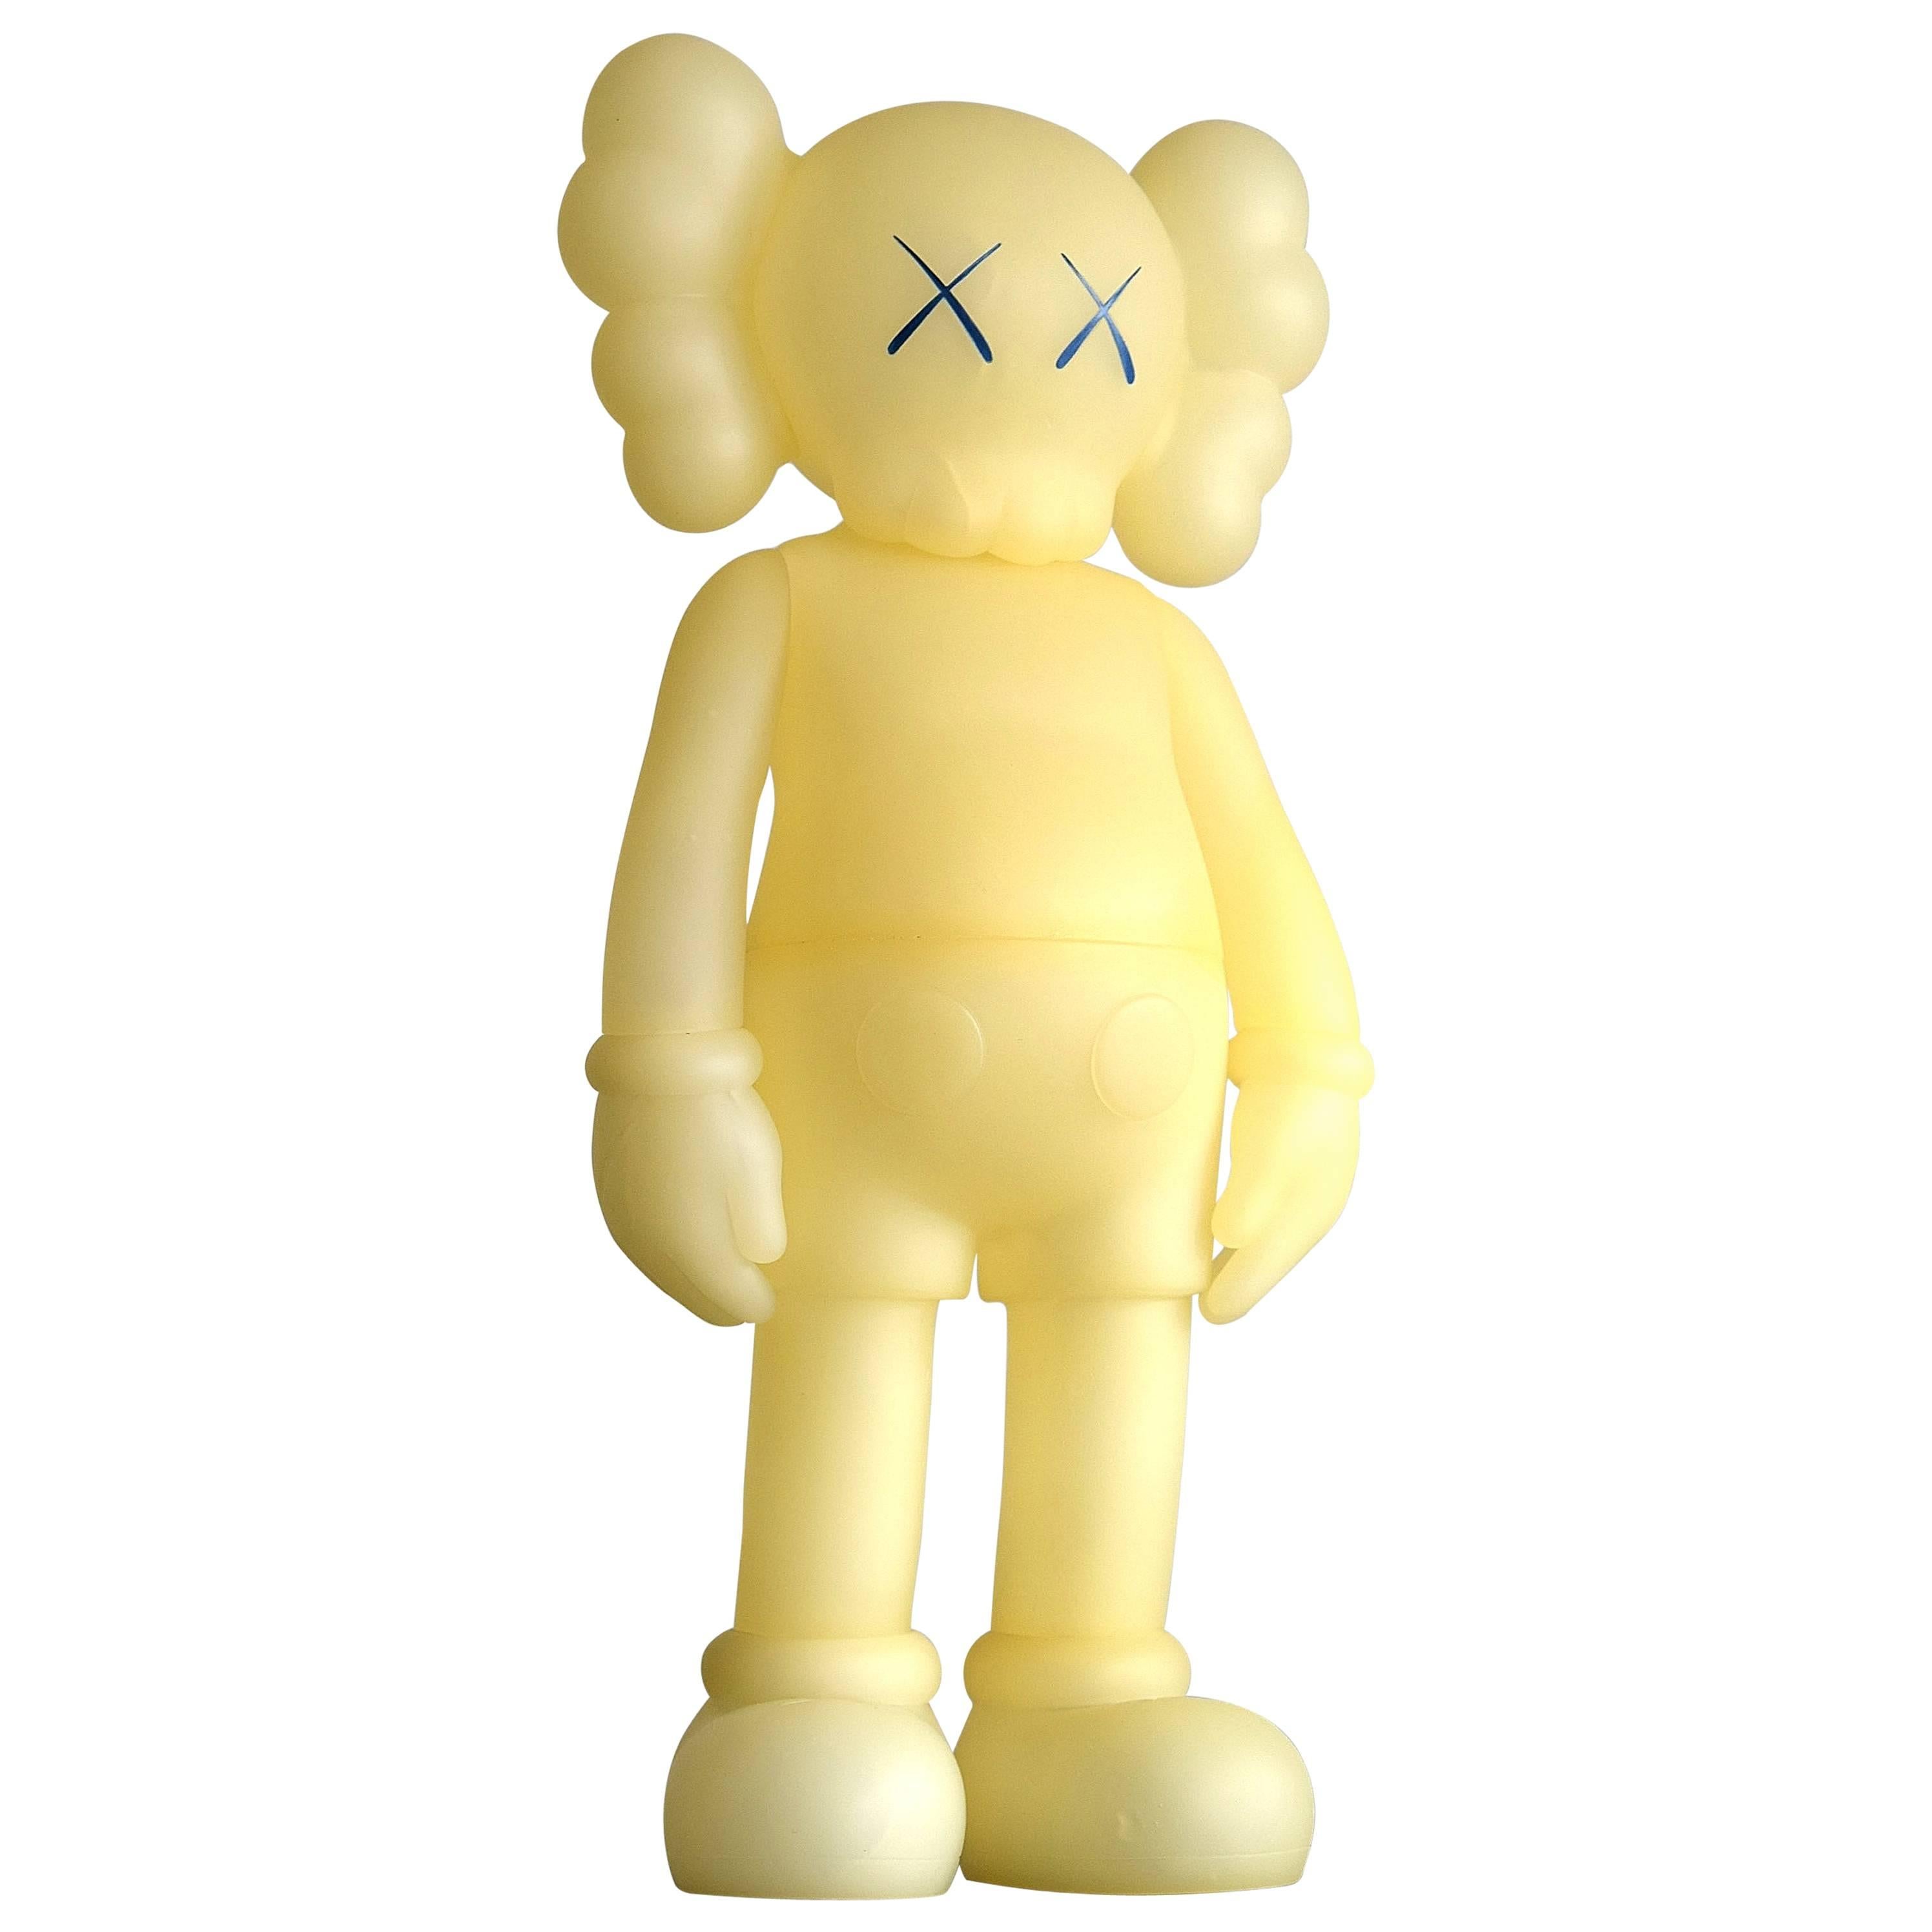 KAWS Companion Five Years Later Glow in the Dark Limited Edition